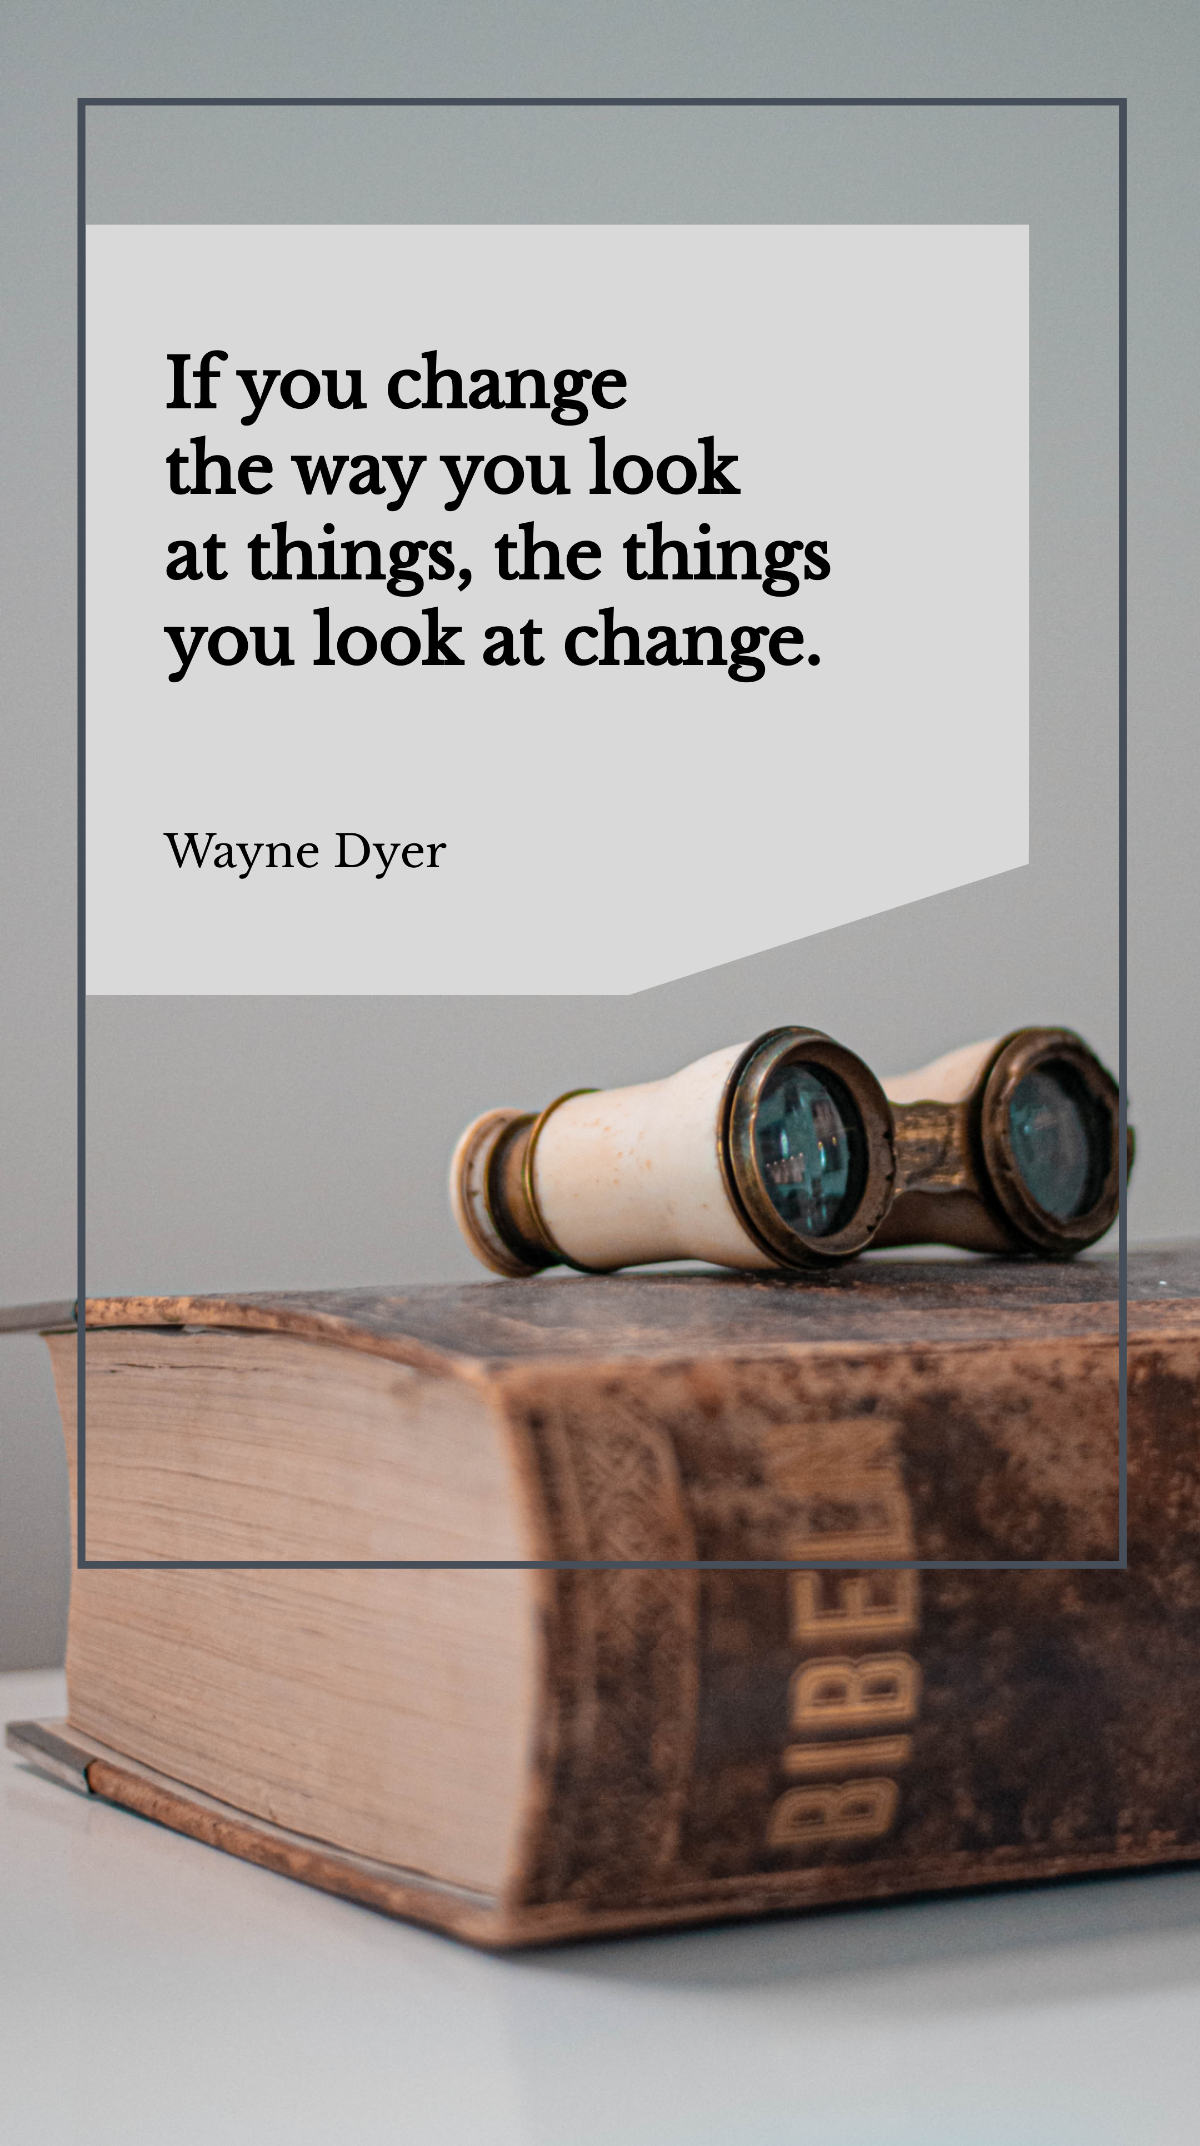 Wayne Dyer - If you change the way you look at things, the things you look at change